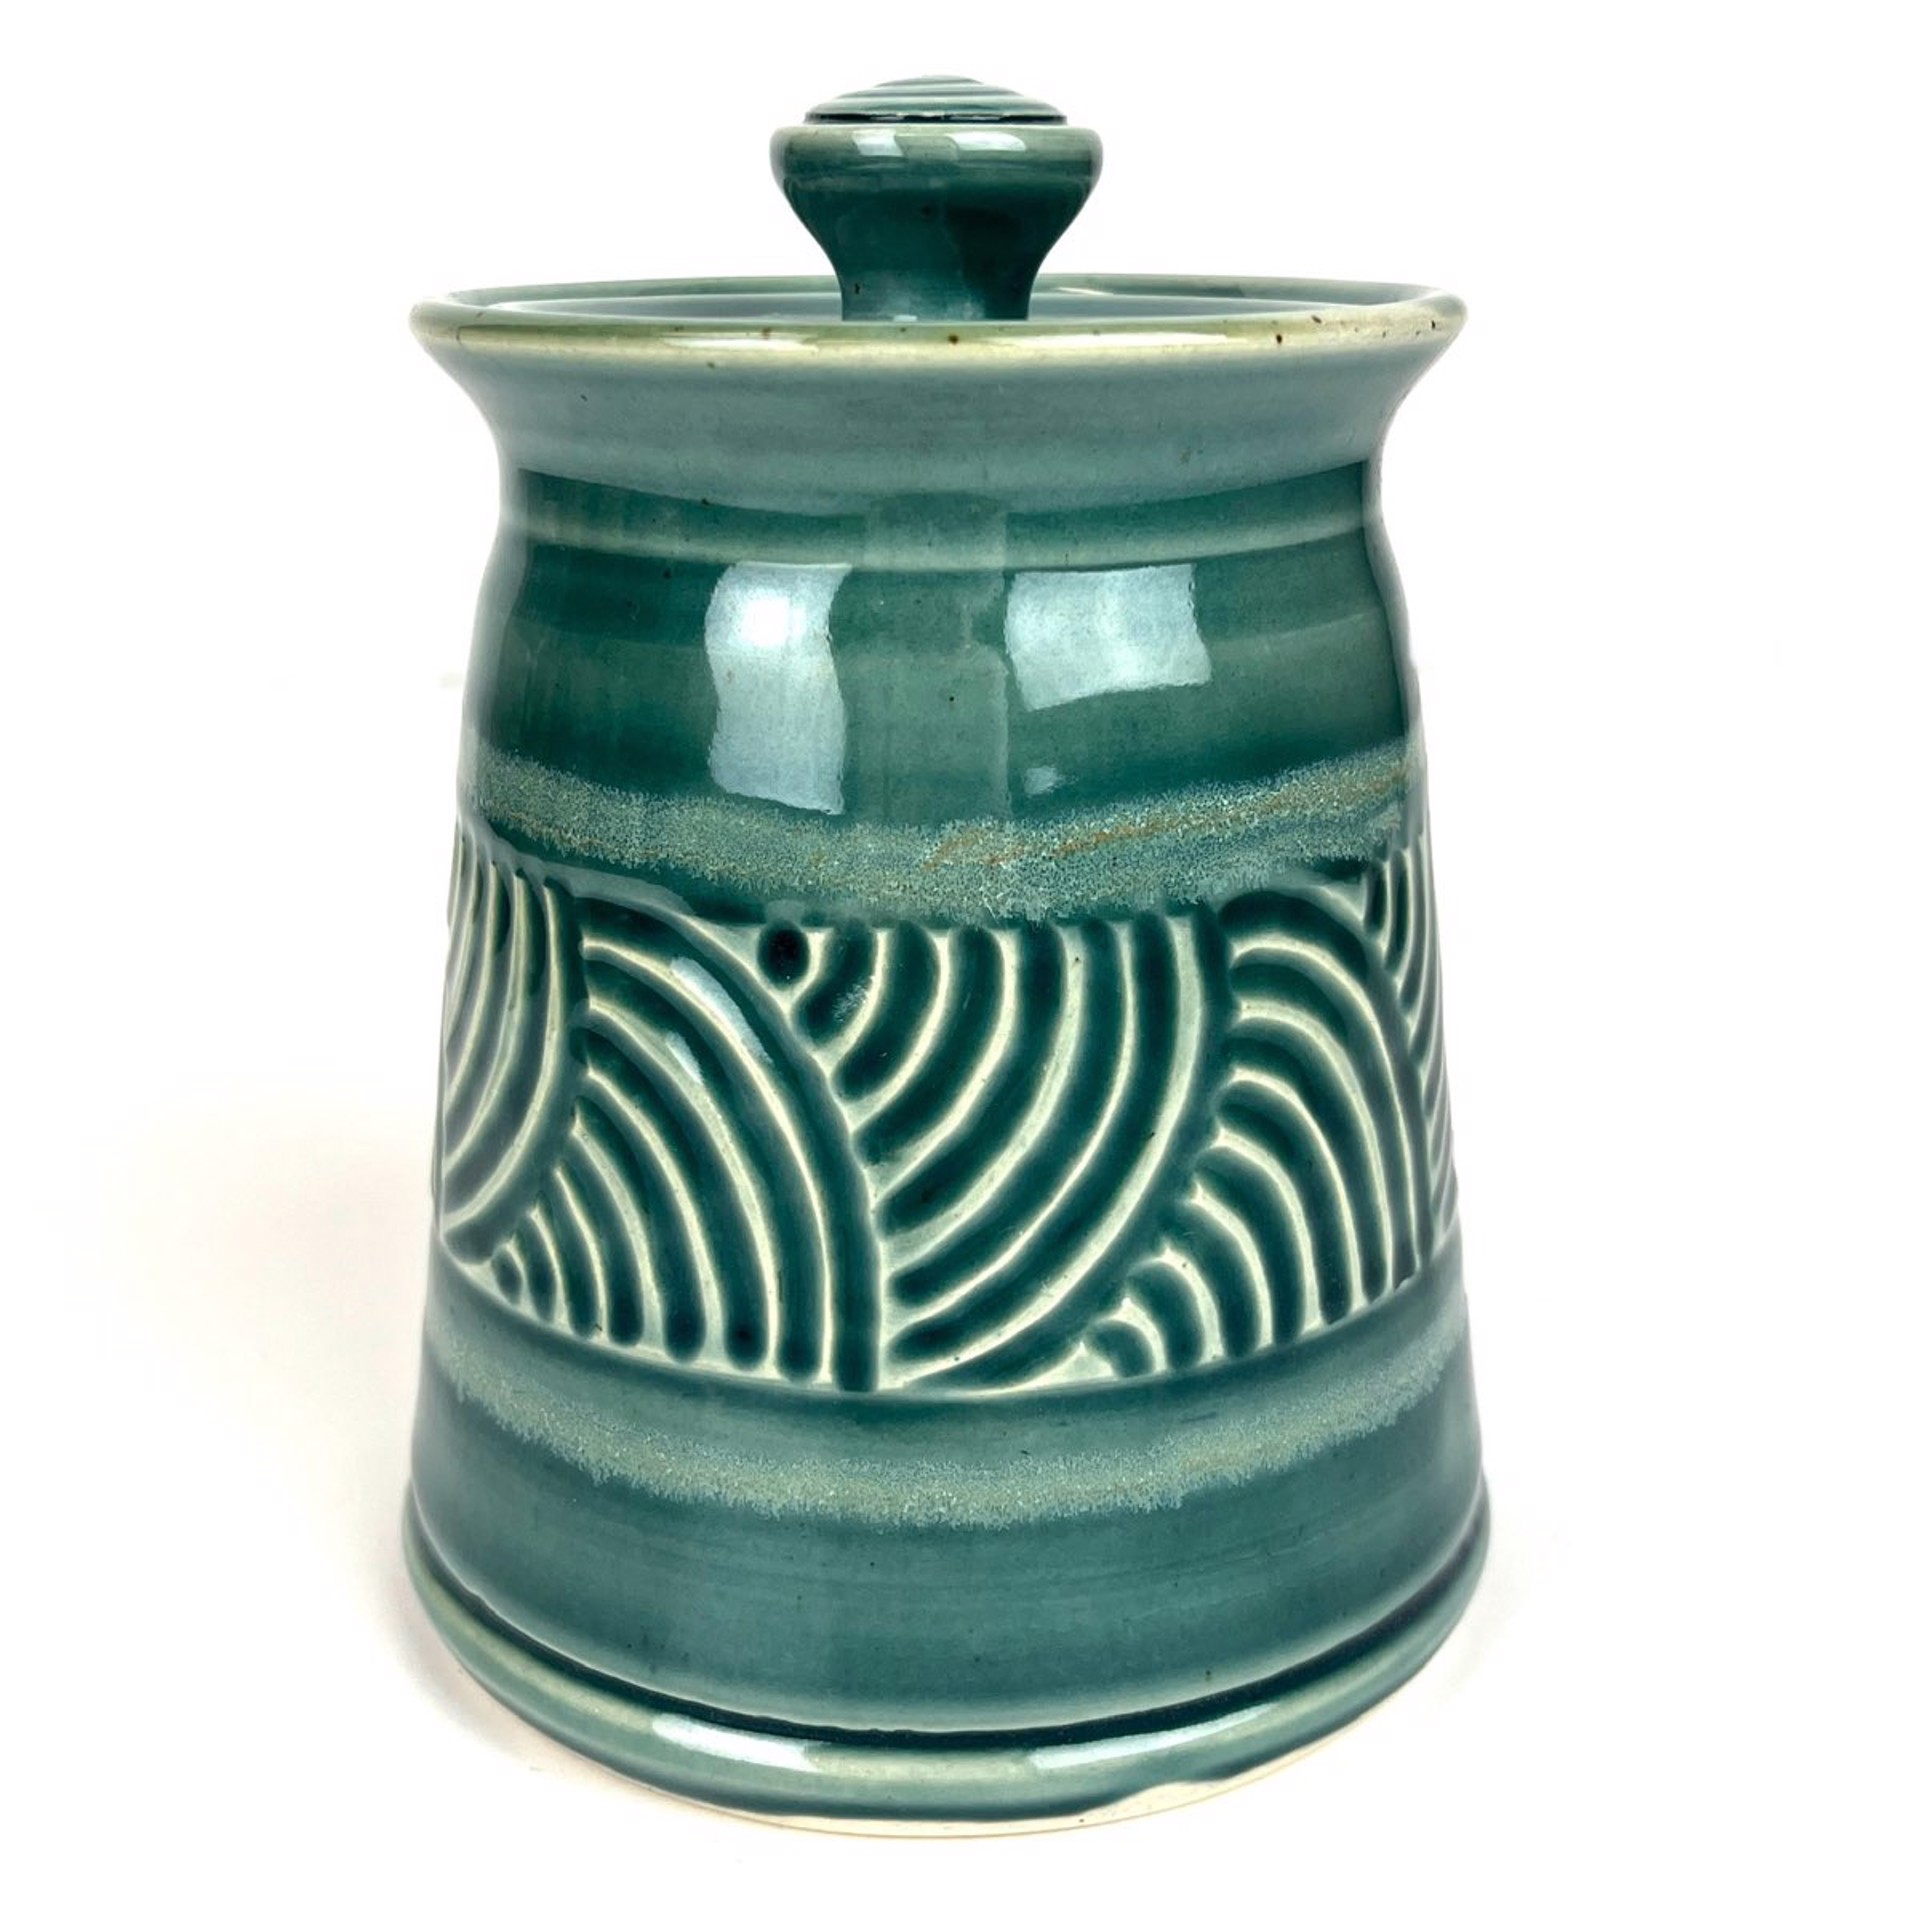 Carved Lidded Container by Mary Lynn Portera